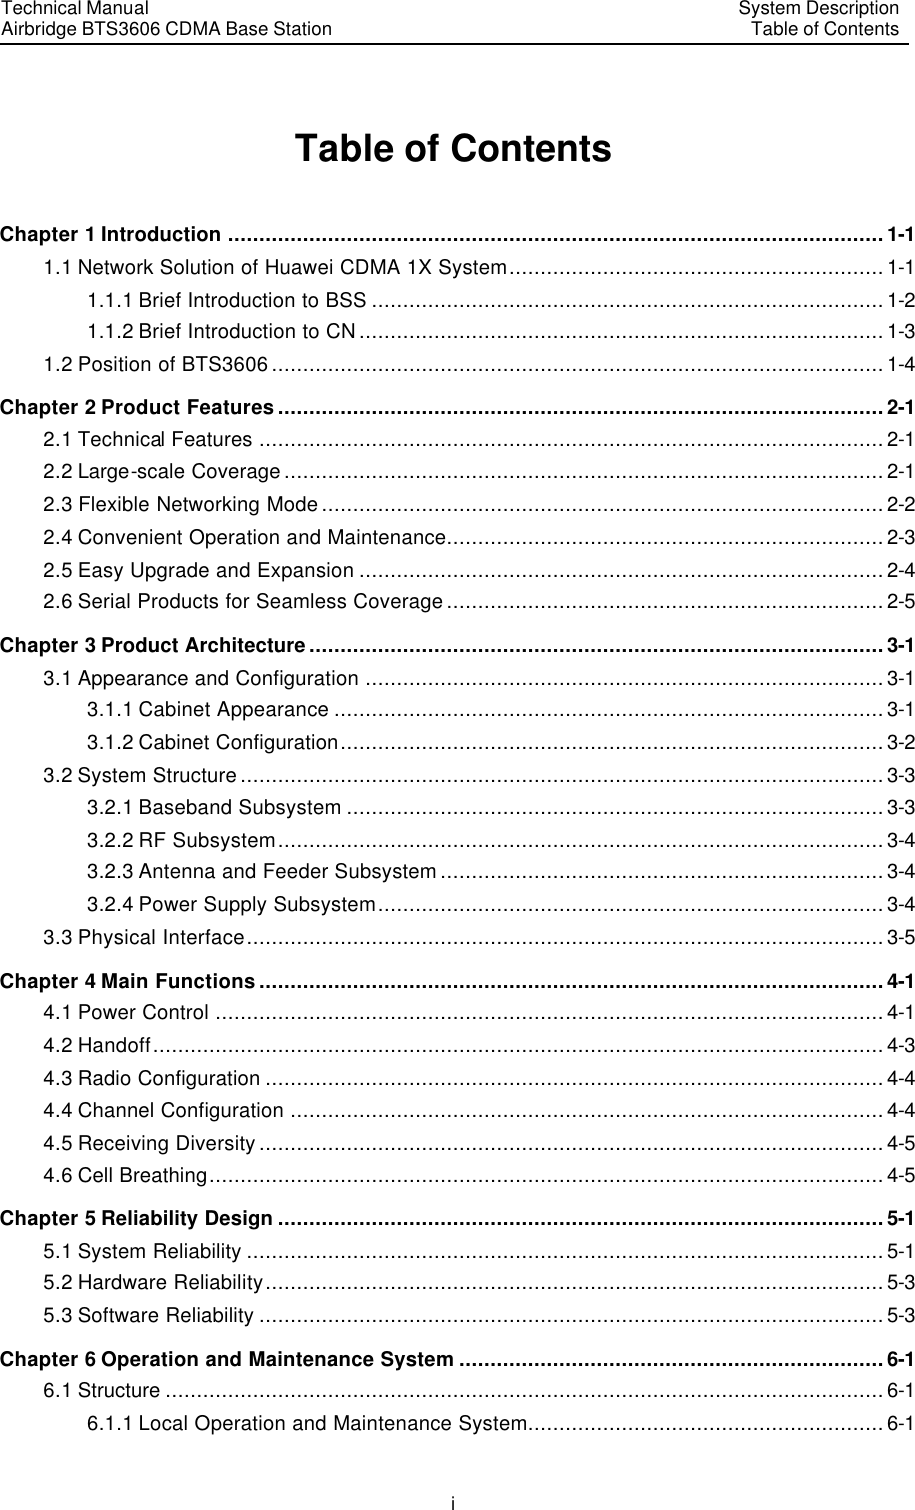 Technical Manual Airbridge BTS3606 CDMA Base Station System Description Table of Contents  i Table of Contents Chapter 1 Introduction .........................................................................................................1-1 1.1 Network Solution of Huawei CDMA 1X System............................................................1-1 1.1.1 Brief Introduction to BSS ..................................................................................1-2 1.1.2 Brief Introduction to CN....................................................................................1-3 1.2 Position of BTS3606..................................................................................................1-4 Chapter 2 Product Features.................................................................................................2-1 2.1 Technical Features ....................................................................................................2-1 2.2 Large-scale Coverage................................................................................................2-1 2.3 Flexible Networking Mode..........................................................................................2-2 2.4 Convenient Operation and Maintenance......................................................................2-3 2.5 Easy Upgrade and Expansion ....................................................................................2-4 2.6 Serial Products for Seamless Coverage......................................................................2-5 Chapter 3 Product Architecture............................................................................................3-1 3.1 Appearance and Configuration ...................................................................................3-1 3.1.1 Cabinet Appearance ........................................................................................3-1 3.1.2 Cabinet Configuration.......................................................................................3-2 3.2 System Structure.......................................................................................................3-3 3.2.1 Baseband Subsystem ......................................................................................3-3 3.2.2 RF Subsystem.................................................................................................3-4 3.2.3 Antenna and Feeder Subsystem.......................................................................3-4 3.2.4 Power Supply Subsystem.................................................................................3-4 3.3 Physical Interface......................................................................................................3-5 Chapter 4 Main Functions....................................................................................................4-1 4.1 Power Control ...........................................................................................................4-1 4.2 Handoff.....................................................................................................................4-3 4.3 Radio Configuration ...................................................................................................4-4 4.4 Channel Configuration ...............................................................................................4-4 4.5 Receiving Diversity....................................................................................................4-5 4.6 Cell Breathing............................................................................................................4-5 Chapter 5 Reliability Design .................................................................................................5-1 5.1 System Reliability ......................................................................................................5-1 5.2 Hardware Reliability...................................................................................................5-3 5.3 Software Reliability ....................................................................................................5-3 Chapter 6 Operation and Maintenance System ....................................................................6-1 6.1 Structure ...................................................................................................................6-1 6.1.1 Local Operation and Maintenance System.........................................................6-1 